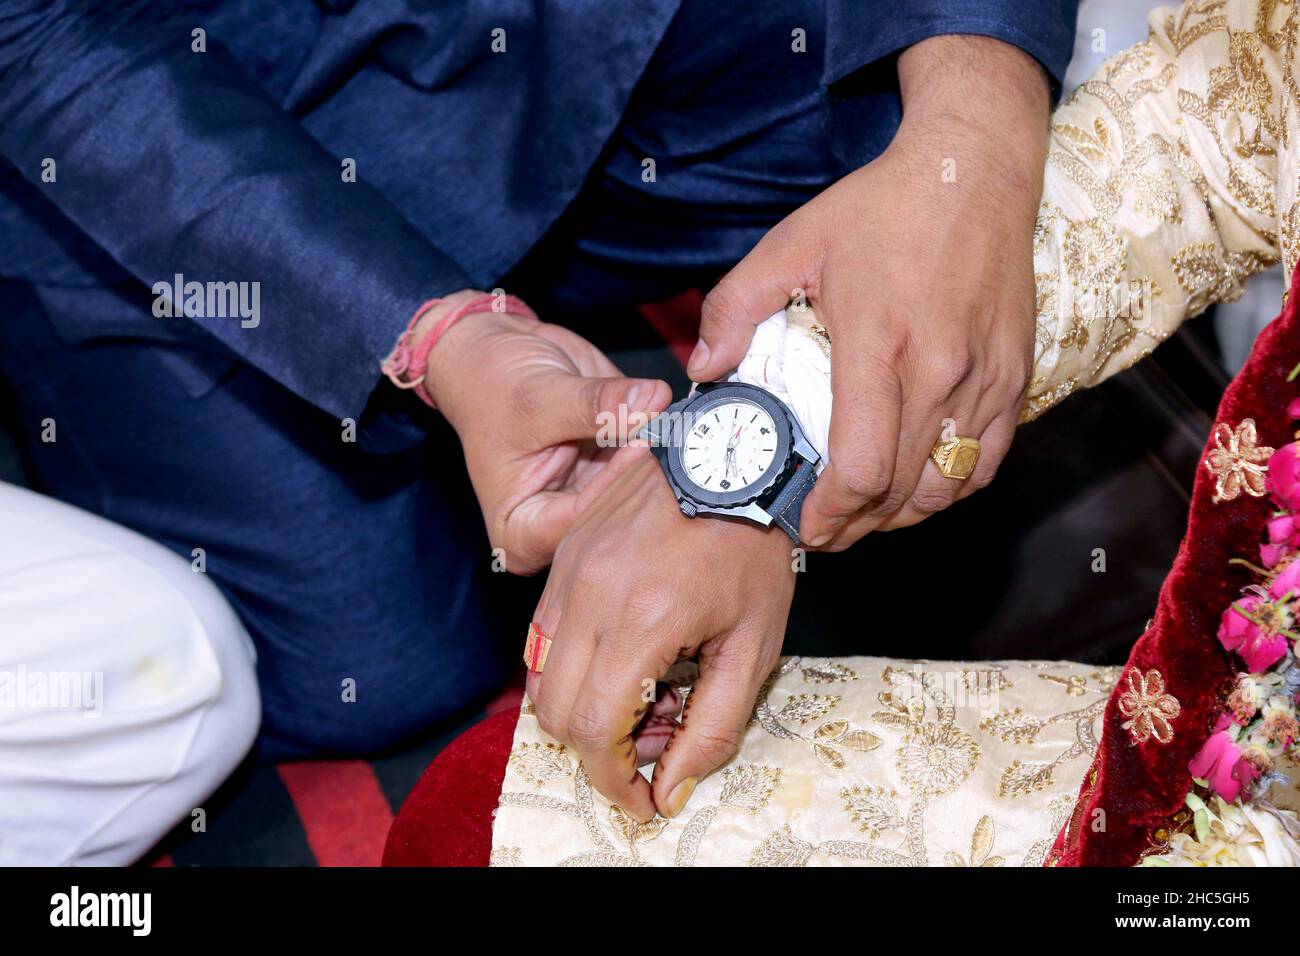 Man in a blue suit putting a watch on a man's hand wearing a traditional suit with flower patterns Stock Photo